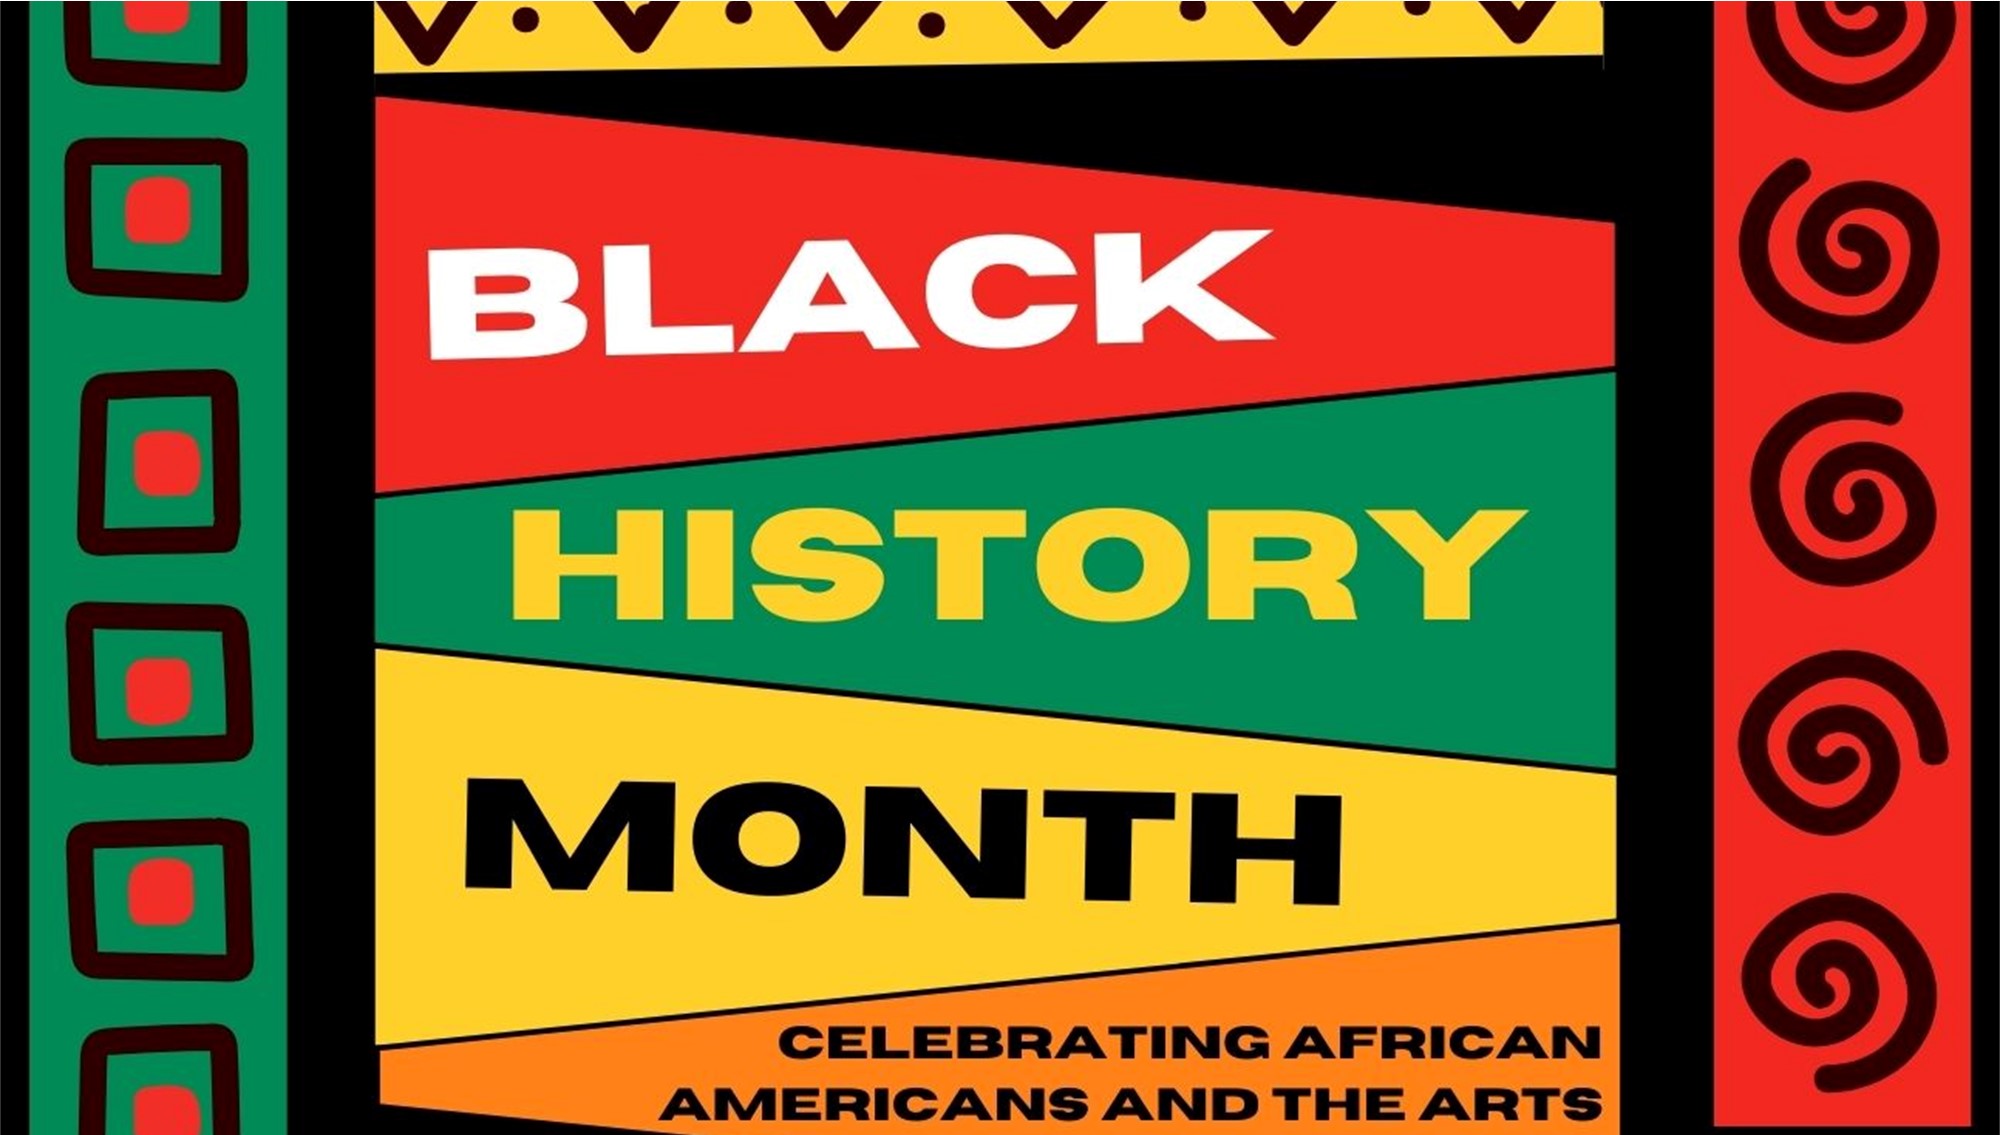 Black history month colors of black, red, green and yellow with poster title. 